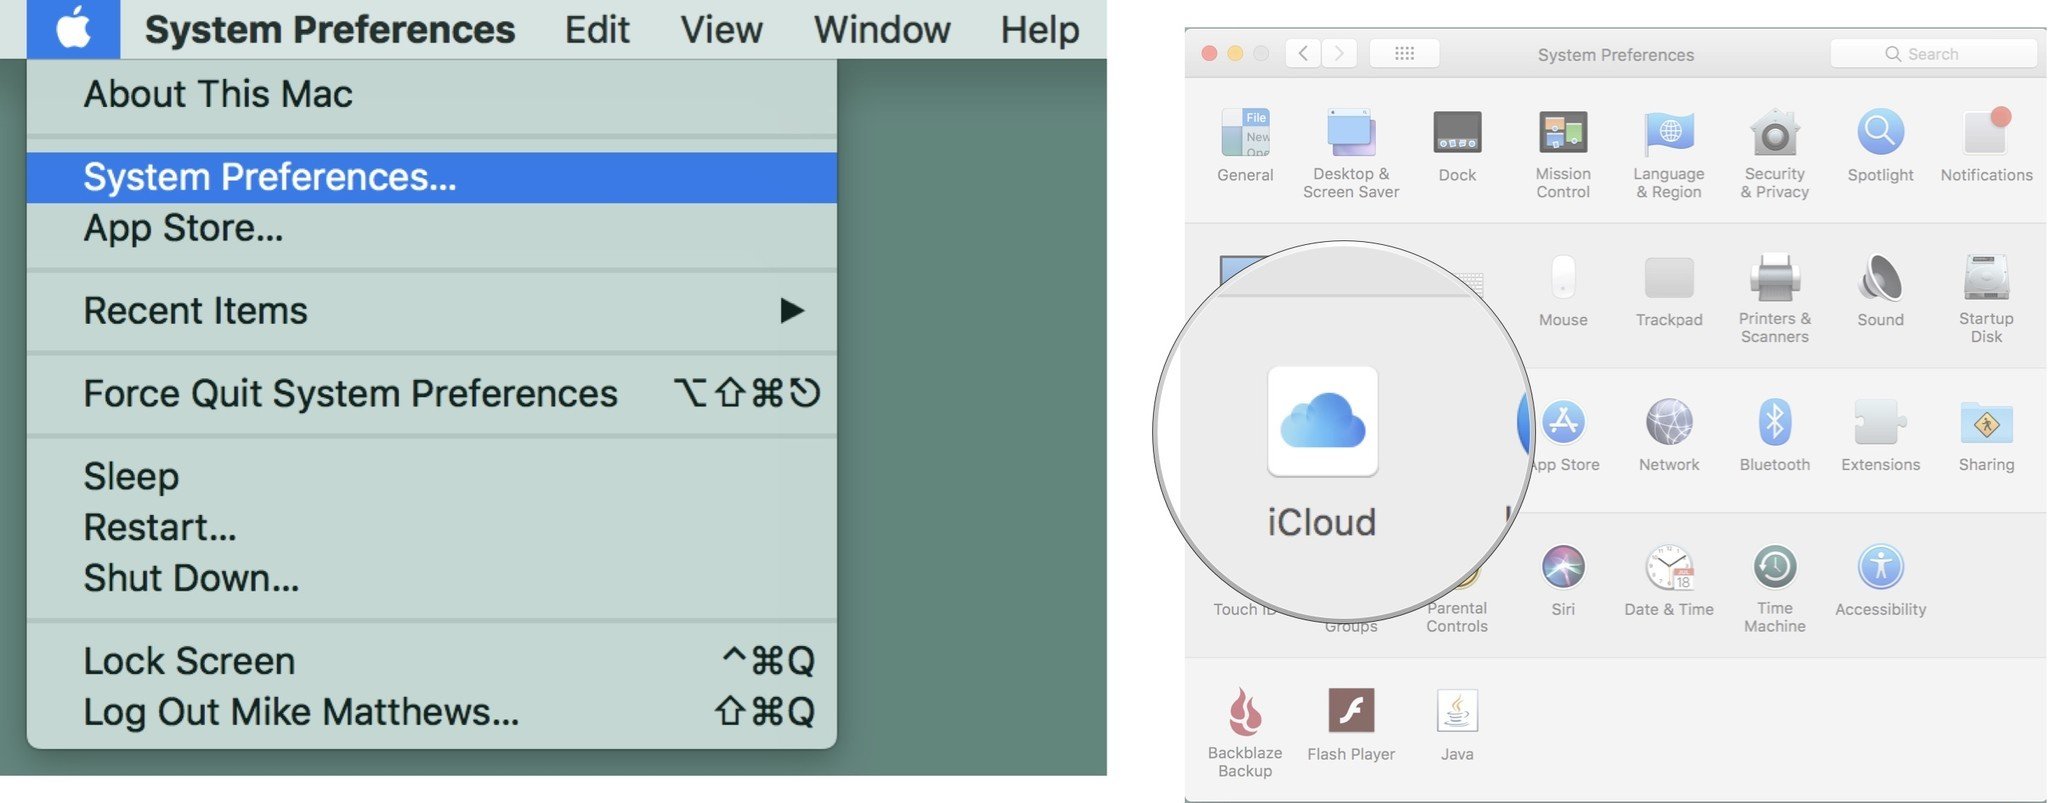 Add a child account: Select System Preferences, then click on iCloud